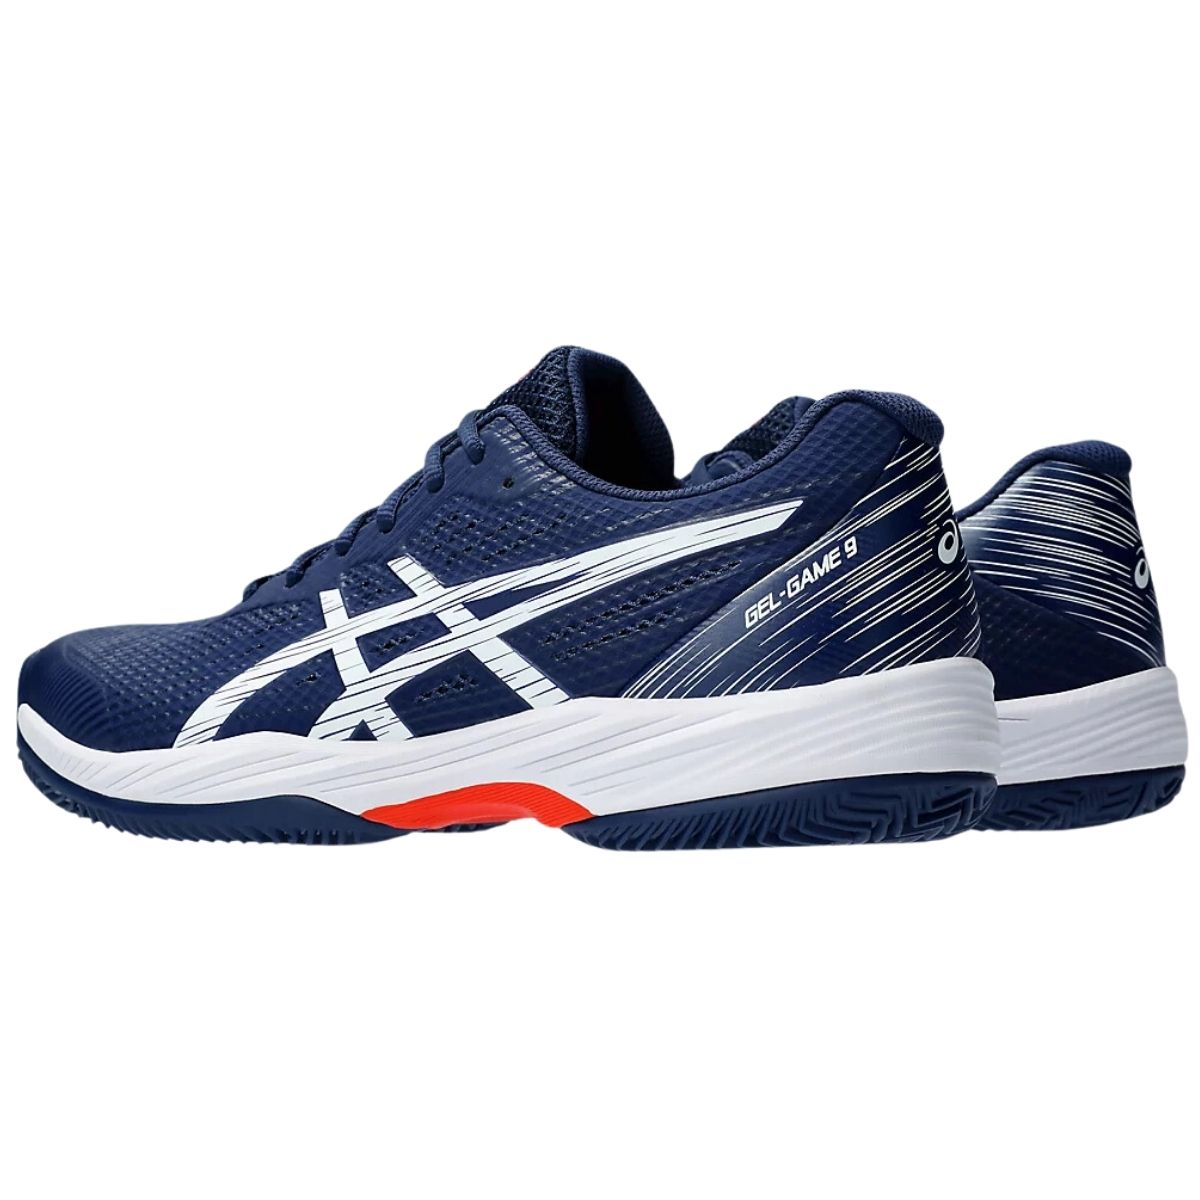 zapatilla-asics-mujer-gel-resolution-9-clay-french-blue-pure-gold-3